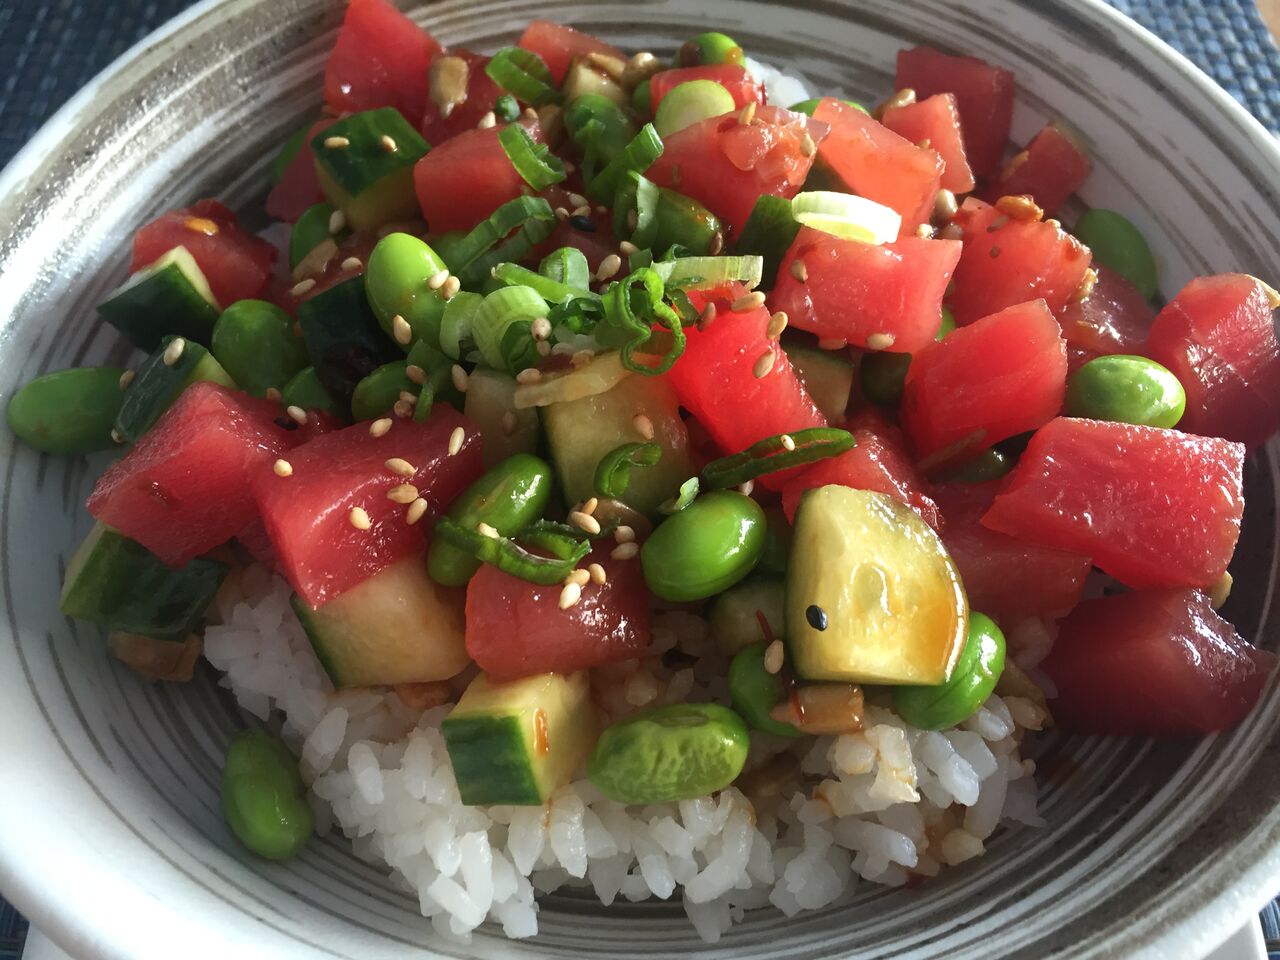 Ahi Poke Bowl with edamame, sunflower seeds, and Hawaiian soy dressing from Sushi Maki in Coral Gables! Click to read more or Pin and save for later.